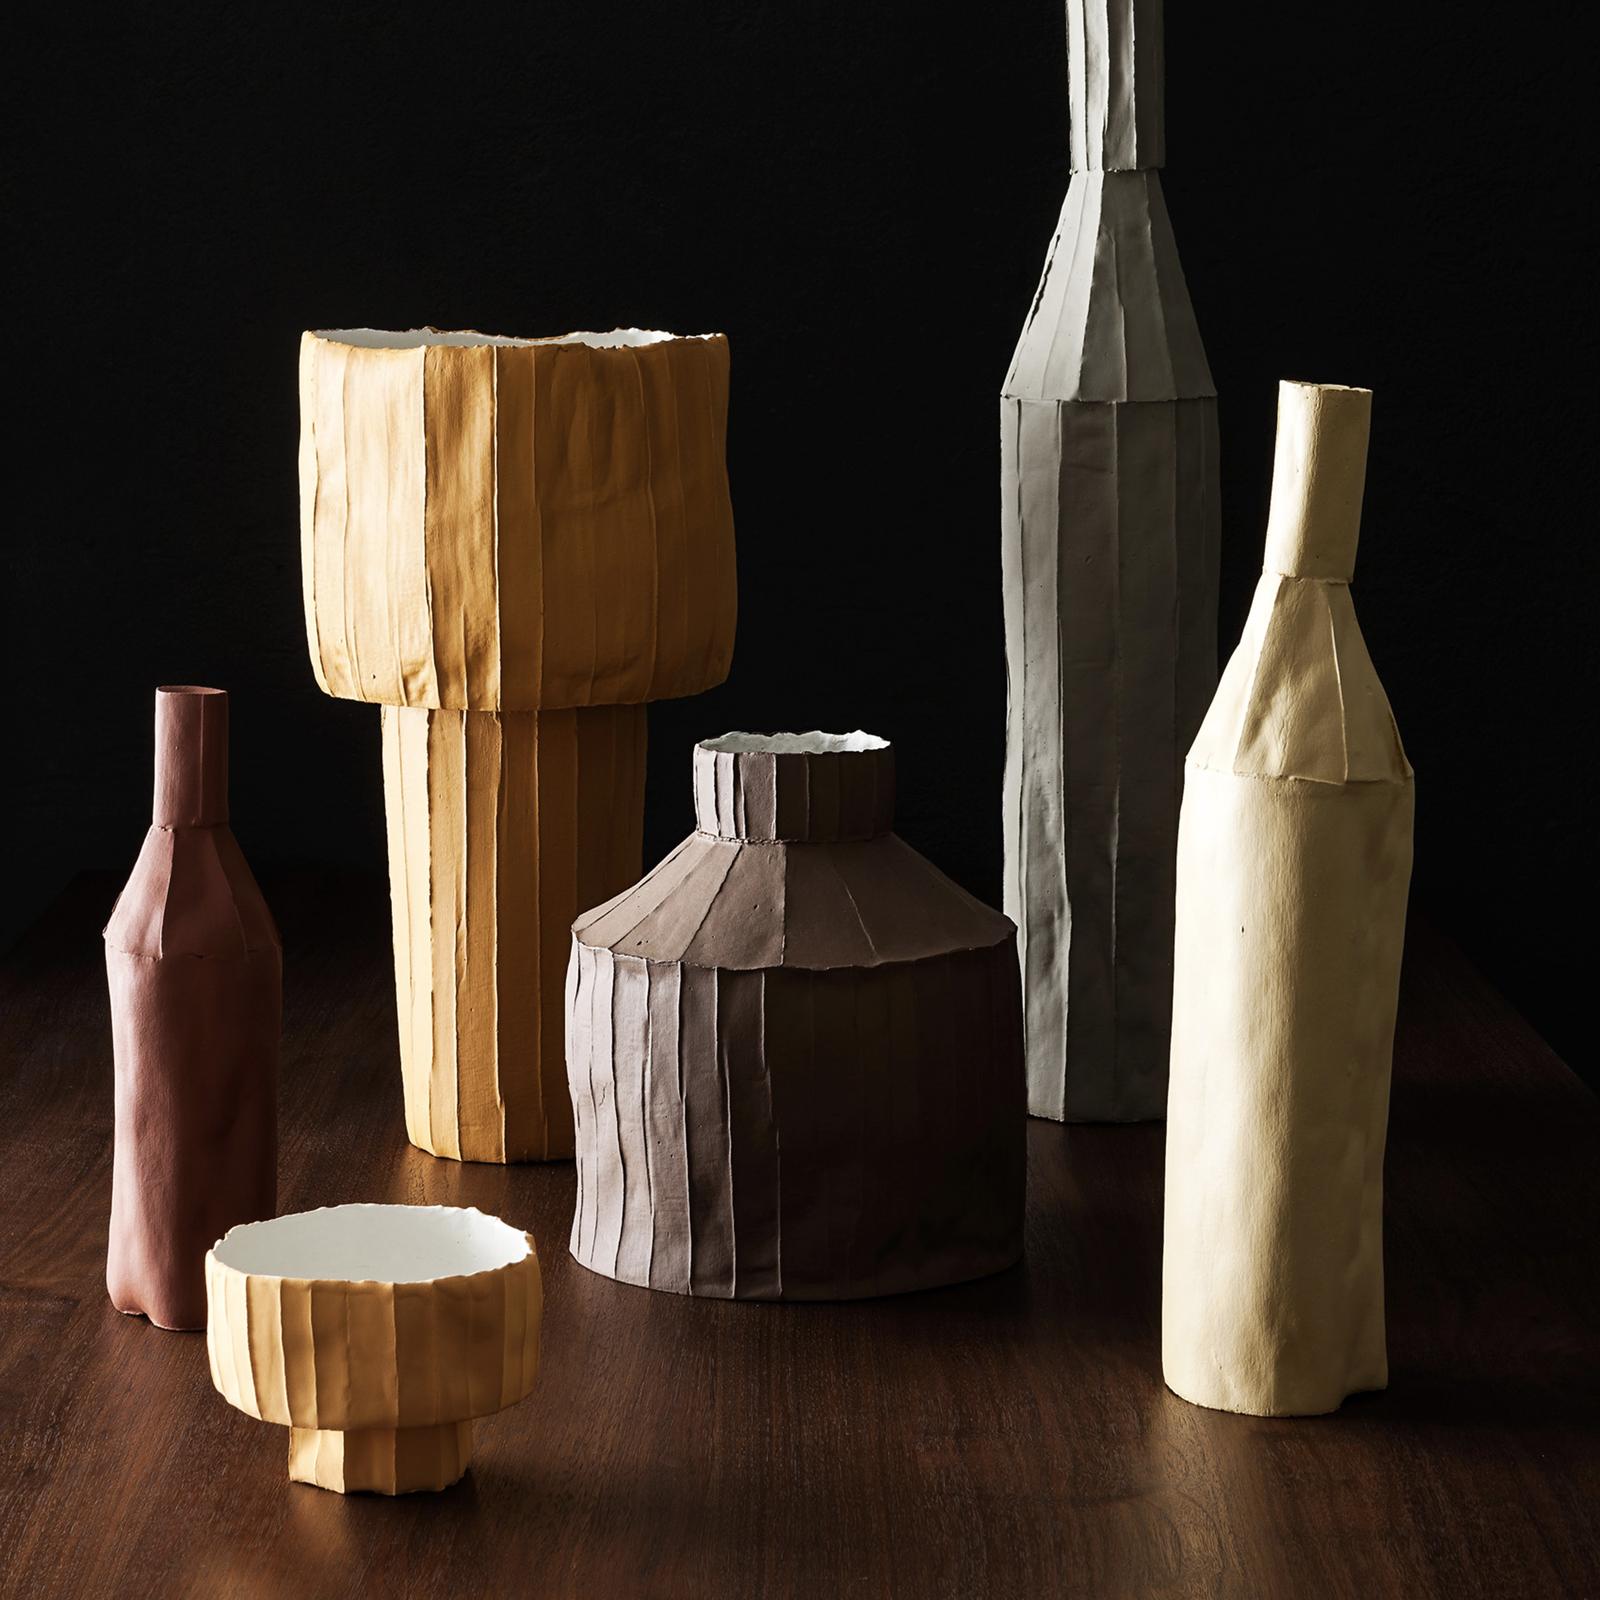 A striking mix between visual lightness and strong character, this bottle-shaped sculpture boasts a delicate beige color whose unique and appealing look will enrich any decor with its modern flair. Part of the Cartocci collection, this piece is